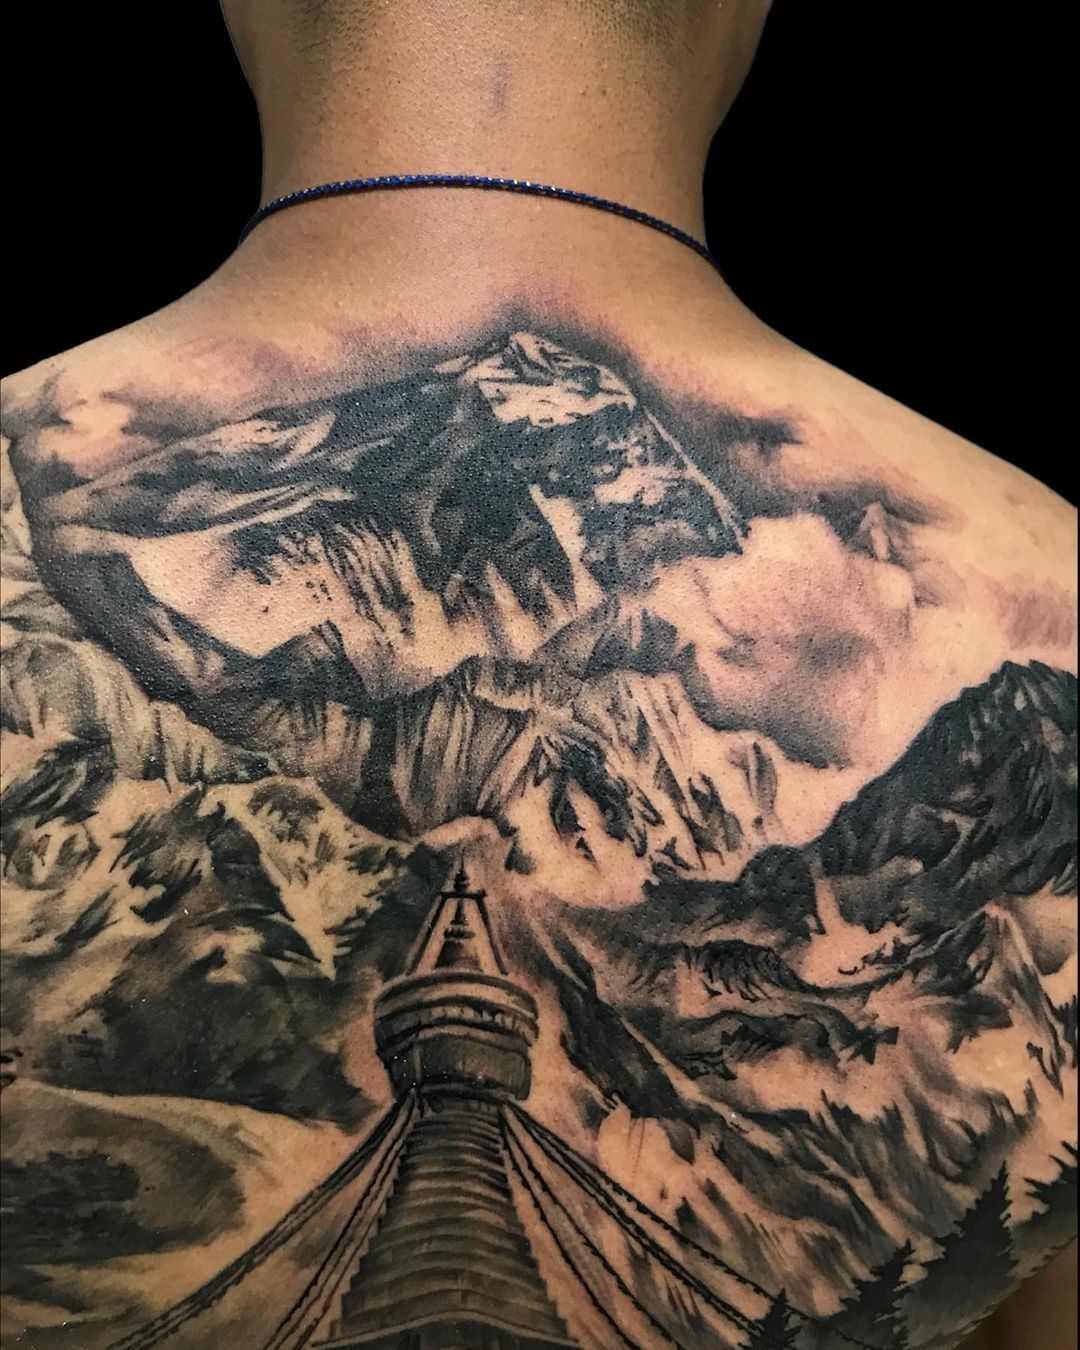 Tattoo uploaded by Joyo 19991 • And old oilpainting made into a tatto sleve  Heald #nature #mountain • Tattoodo